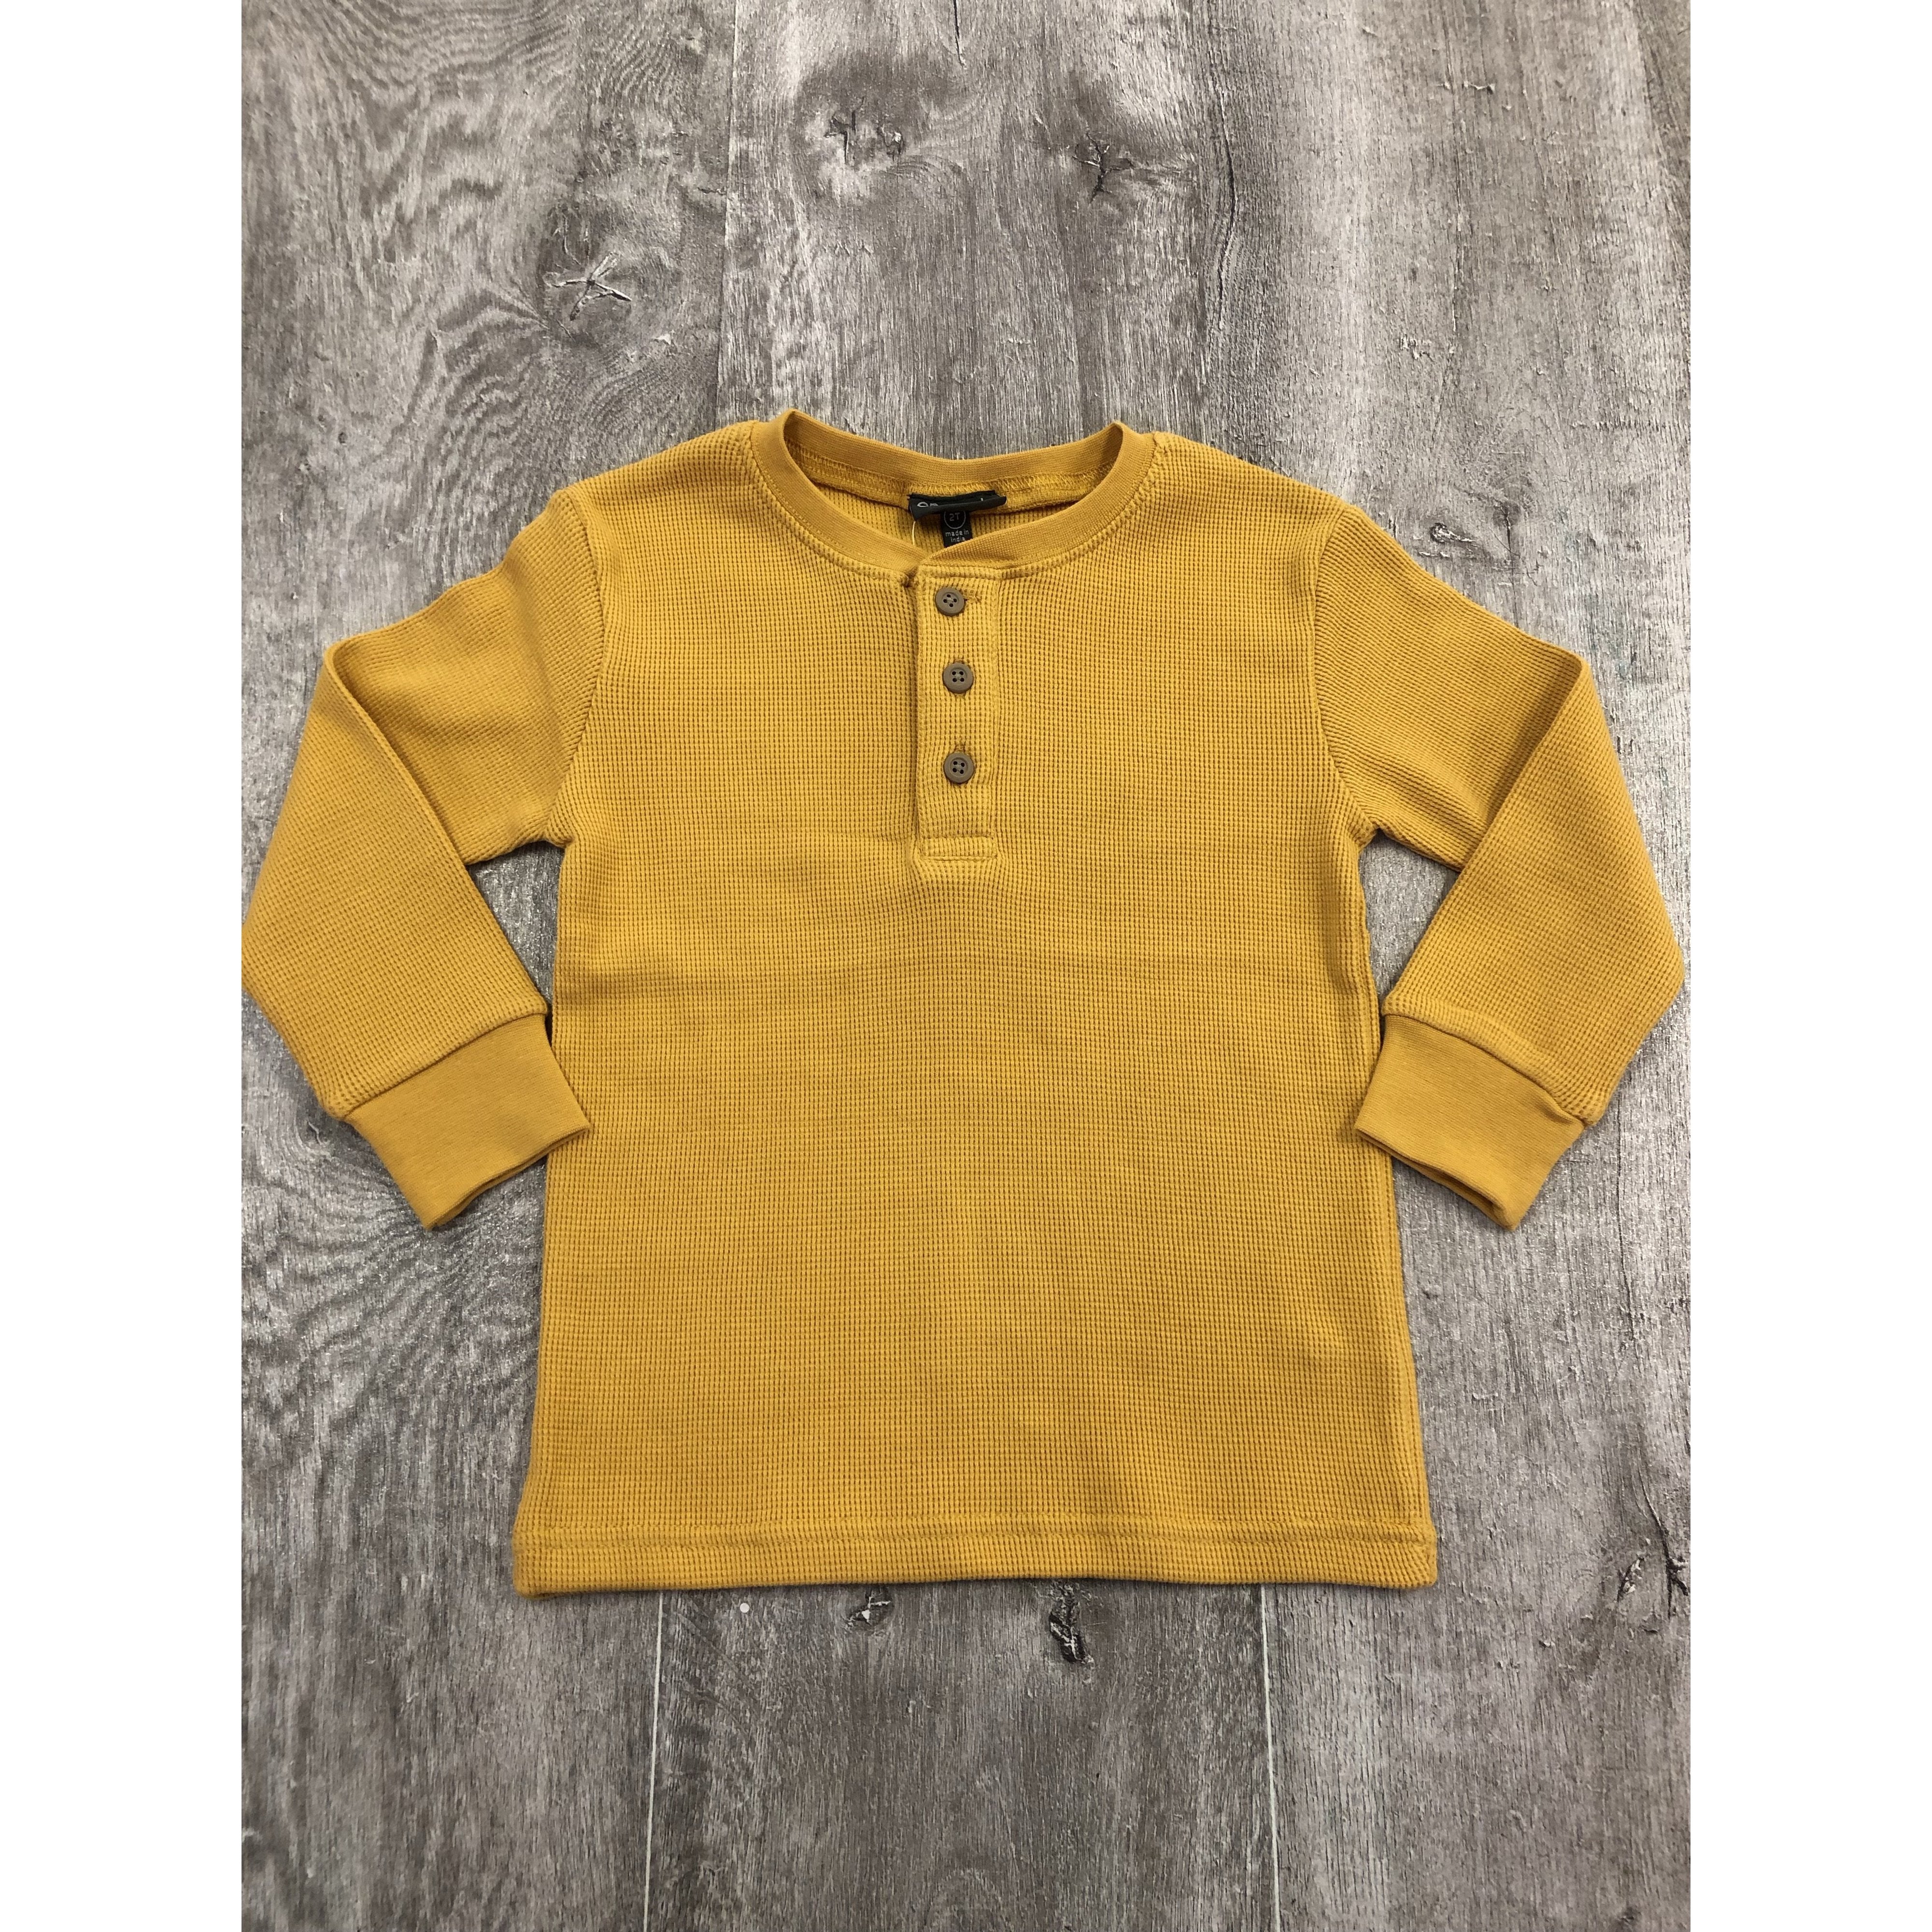 CR Sports Henley Long Sleeve Thermal Top - Yellow-CR SPORTS-Little Giant Kidz